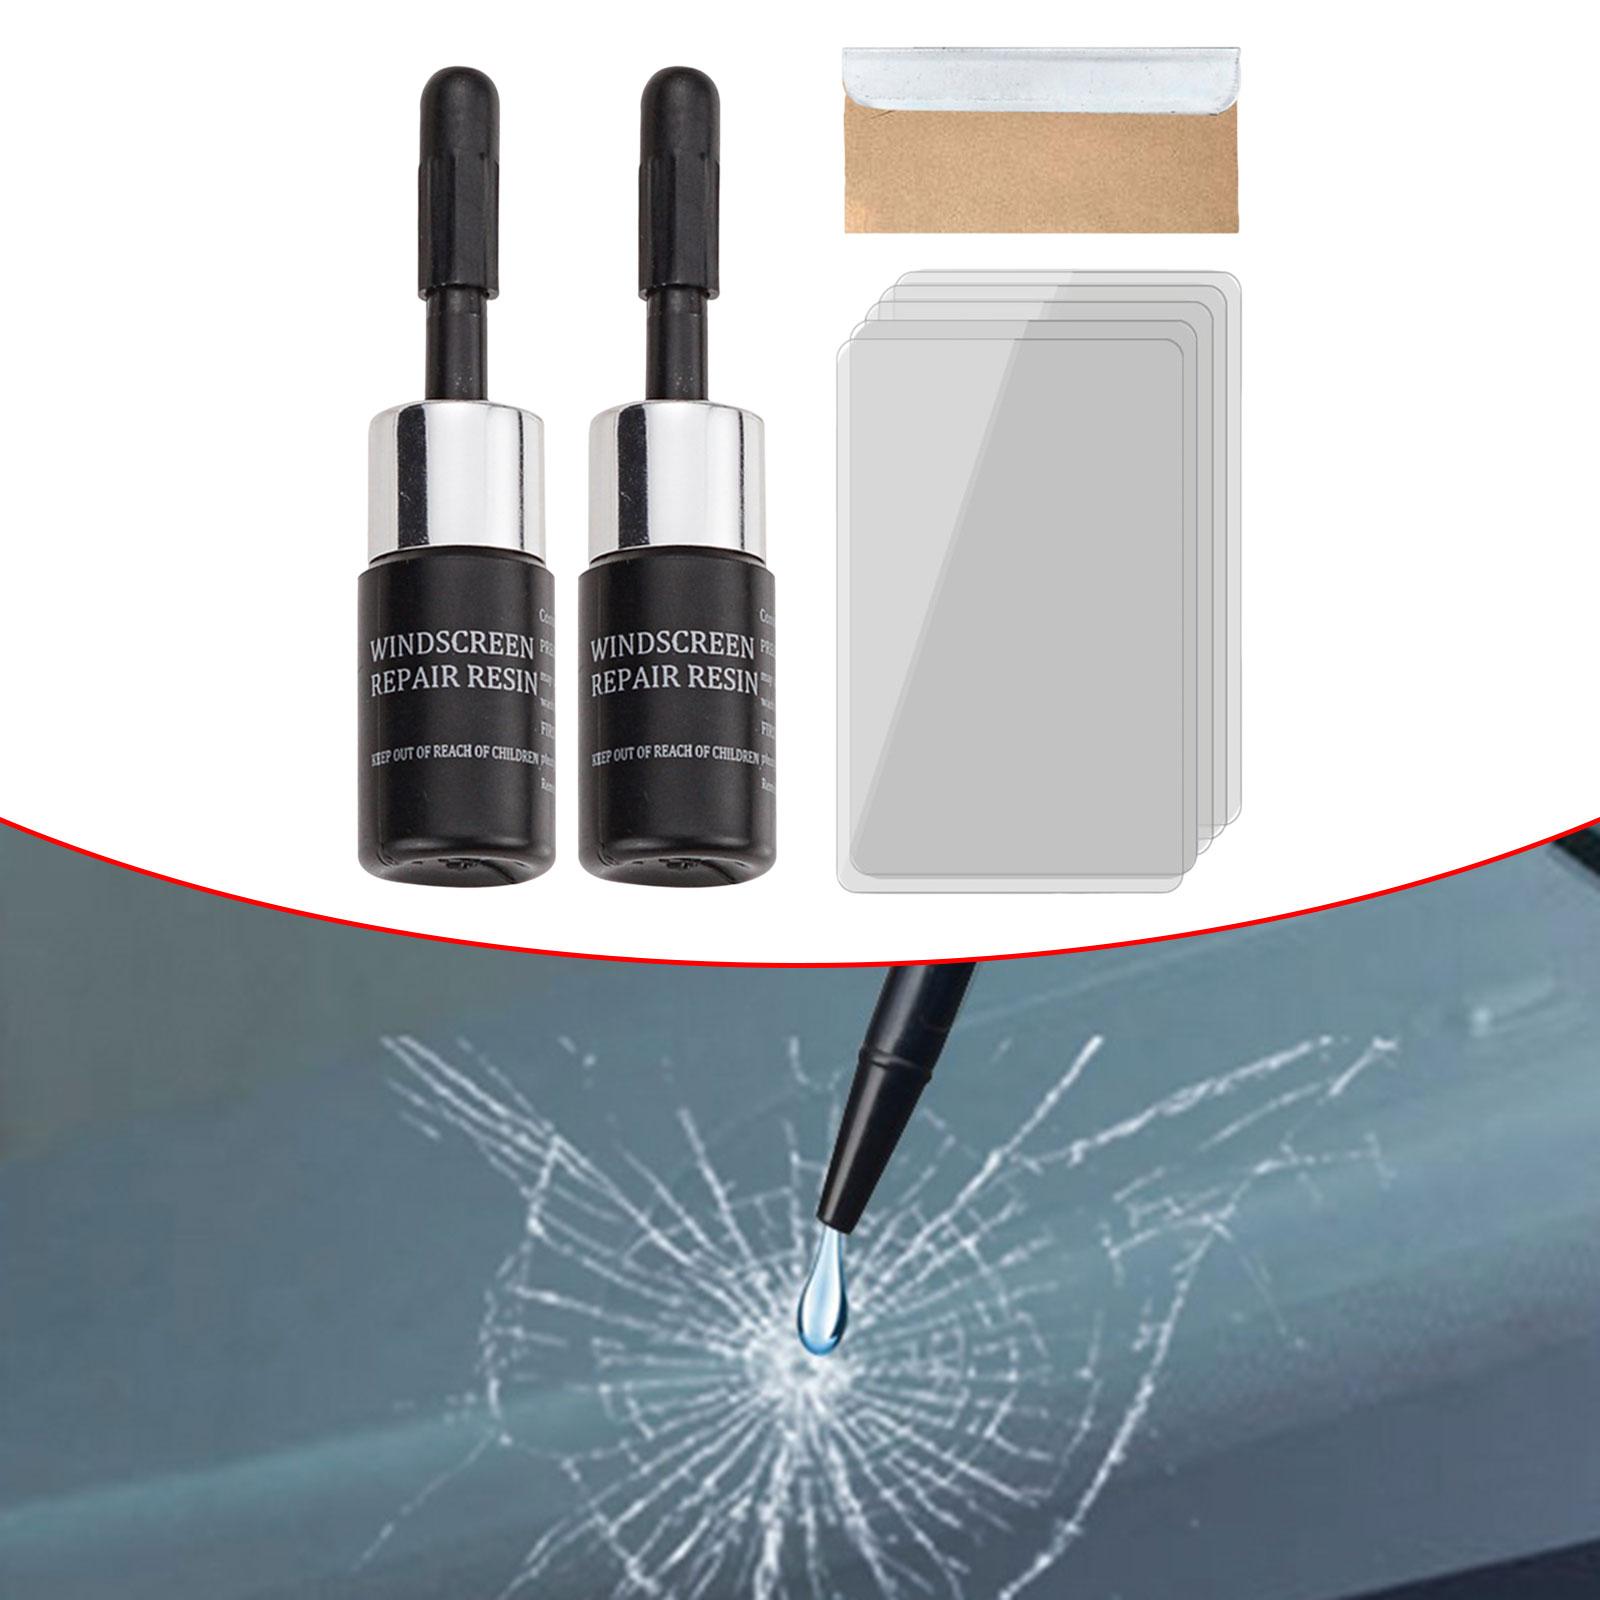 2 Pieces Car Windshield Crack Repair Resin Kit Easy to Use Nano Fluid Filler Black